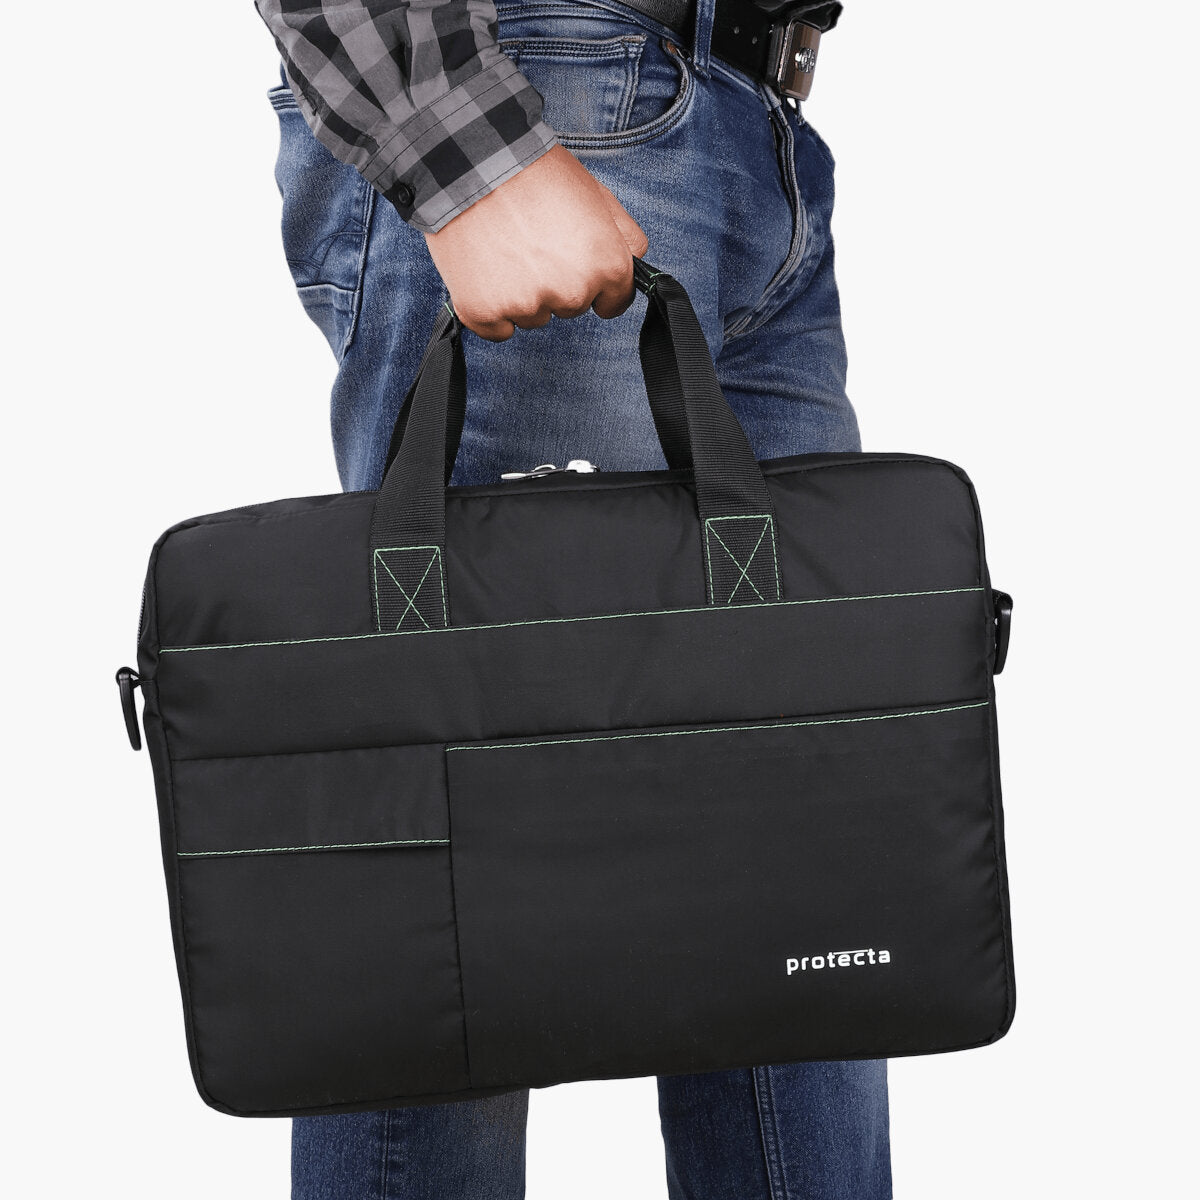 Black-Green | Protecta Pace Laptop Office Bag-7